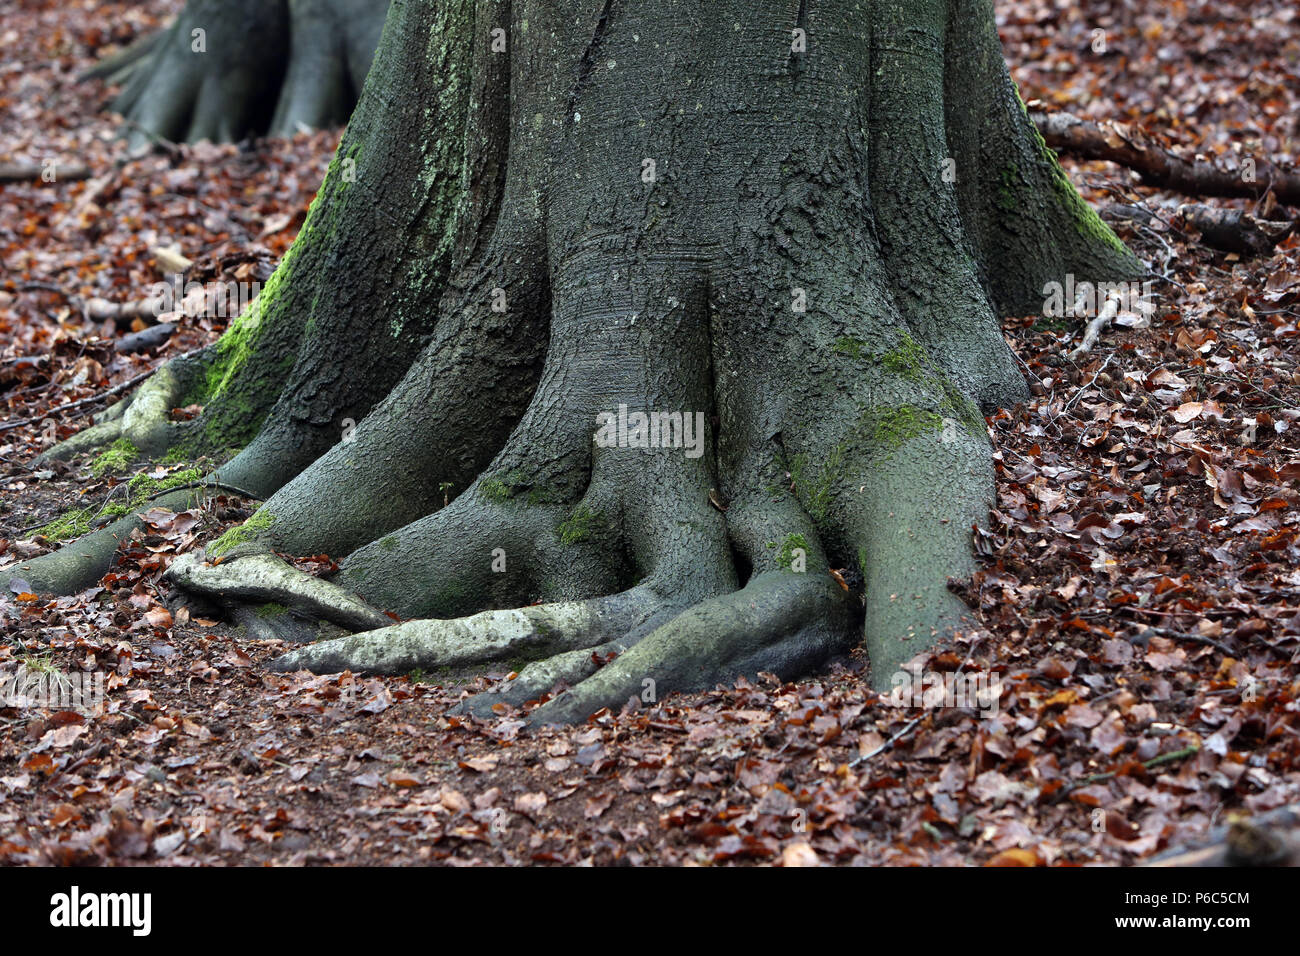 New Kaetwin, Germany - tree roots in autumn leaves Stock Photo